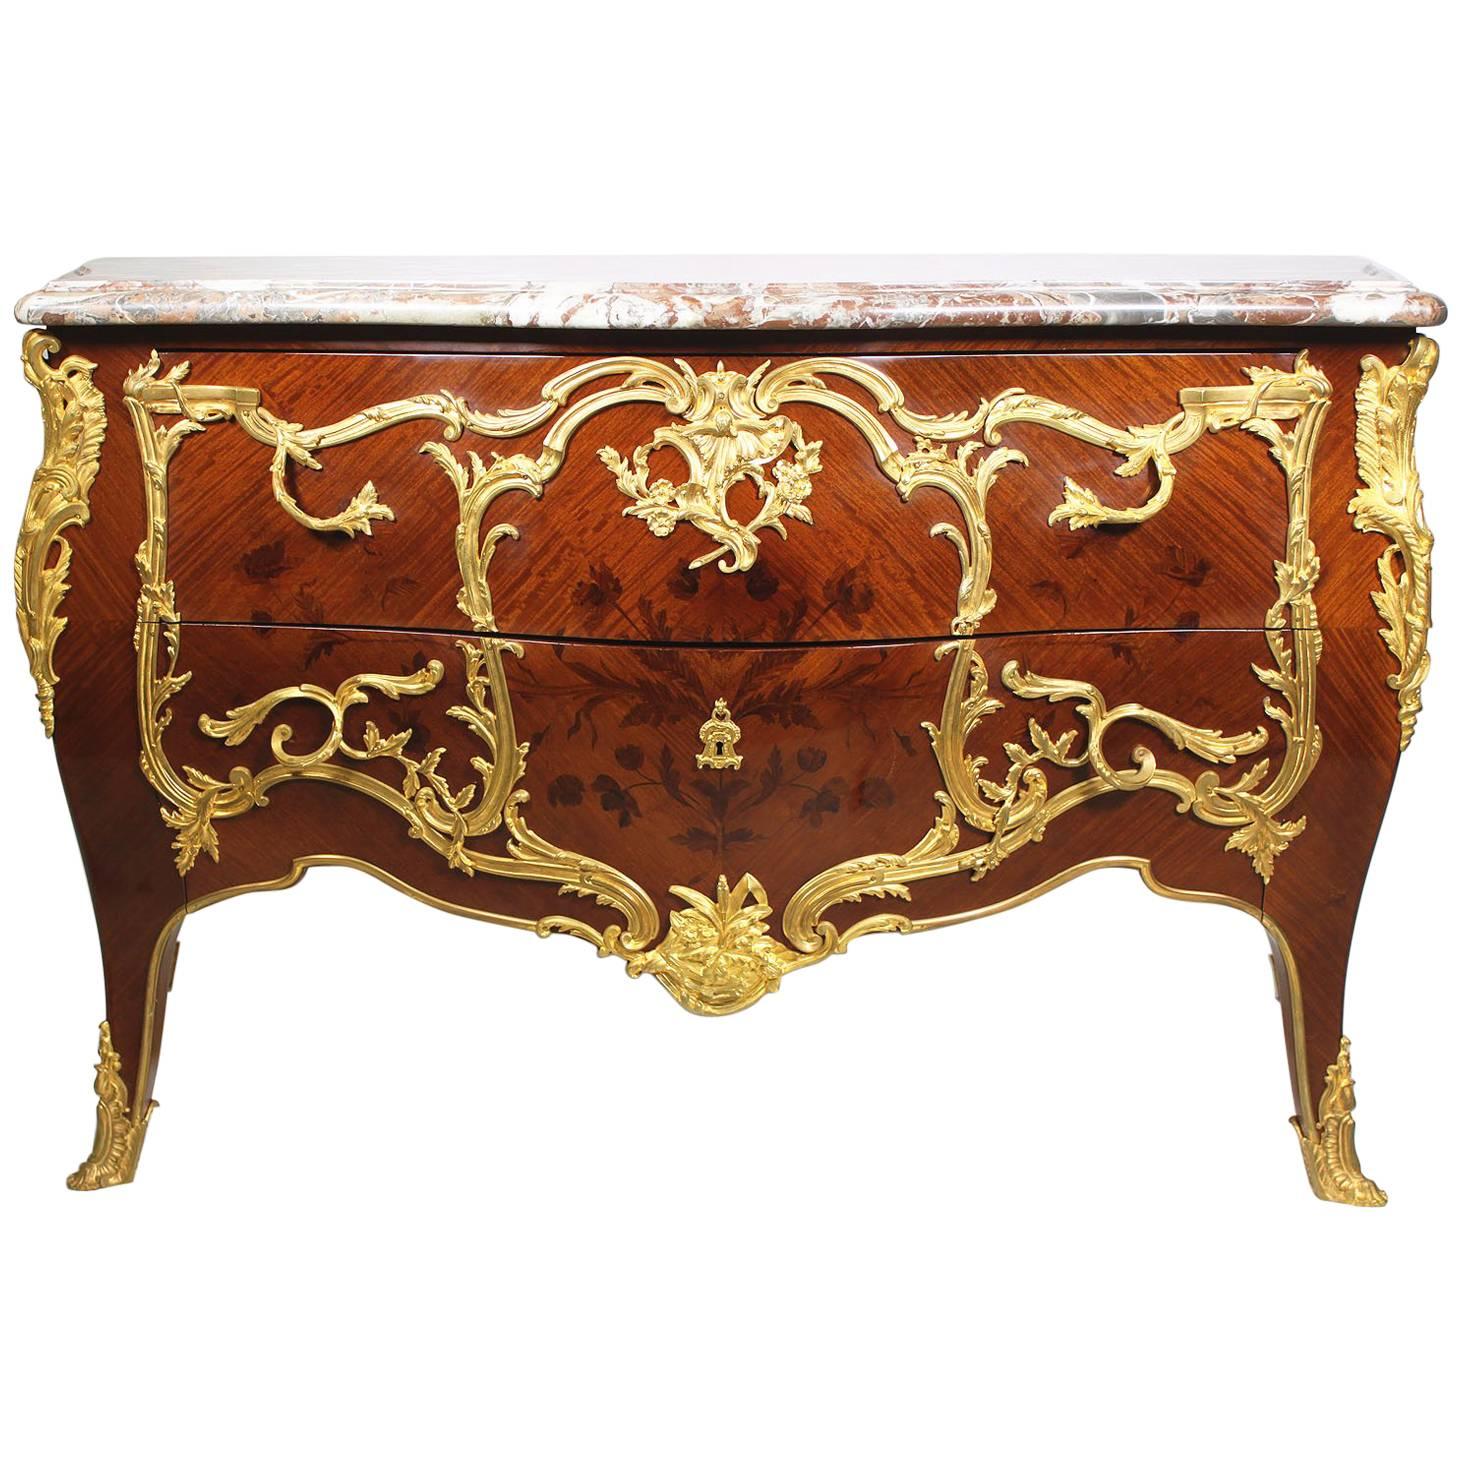 French 19th-20th century Louis XV Style Gilt Bronze Mounted Marquetry Commode For Sale